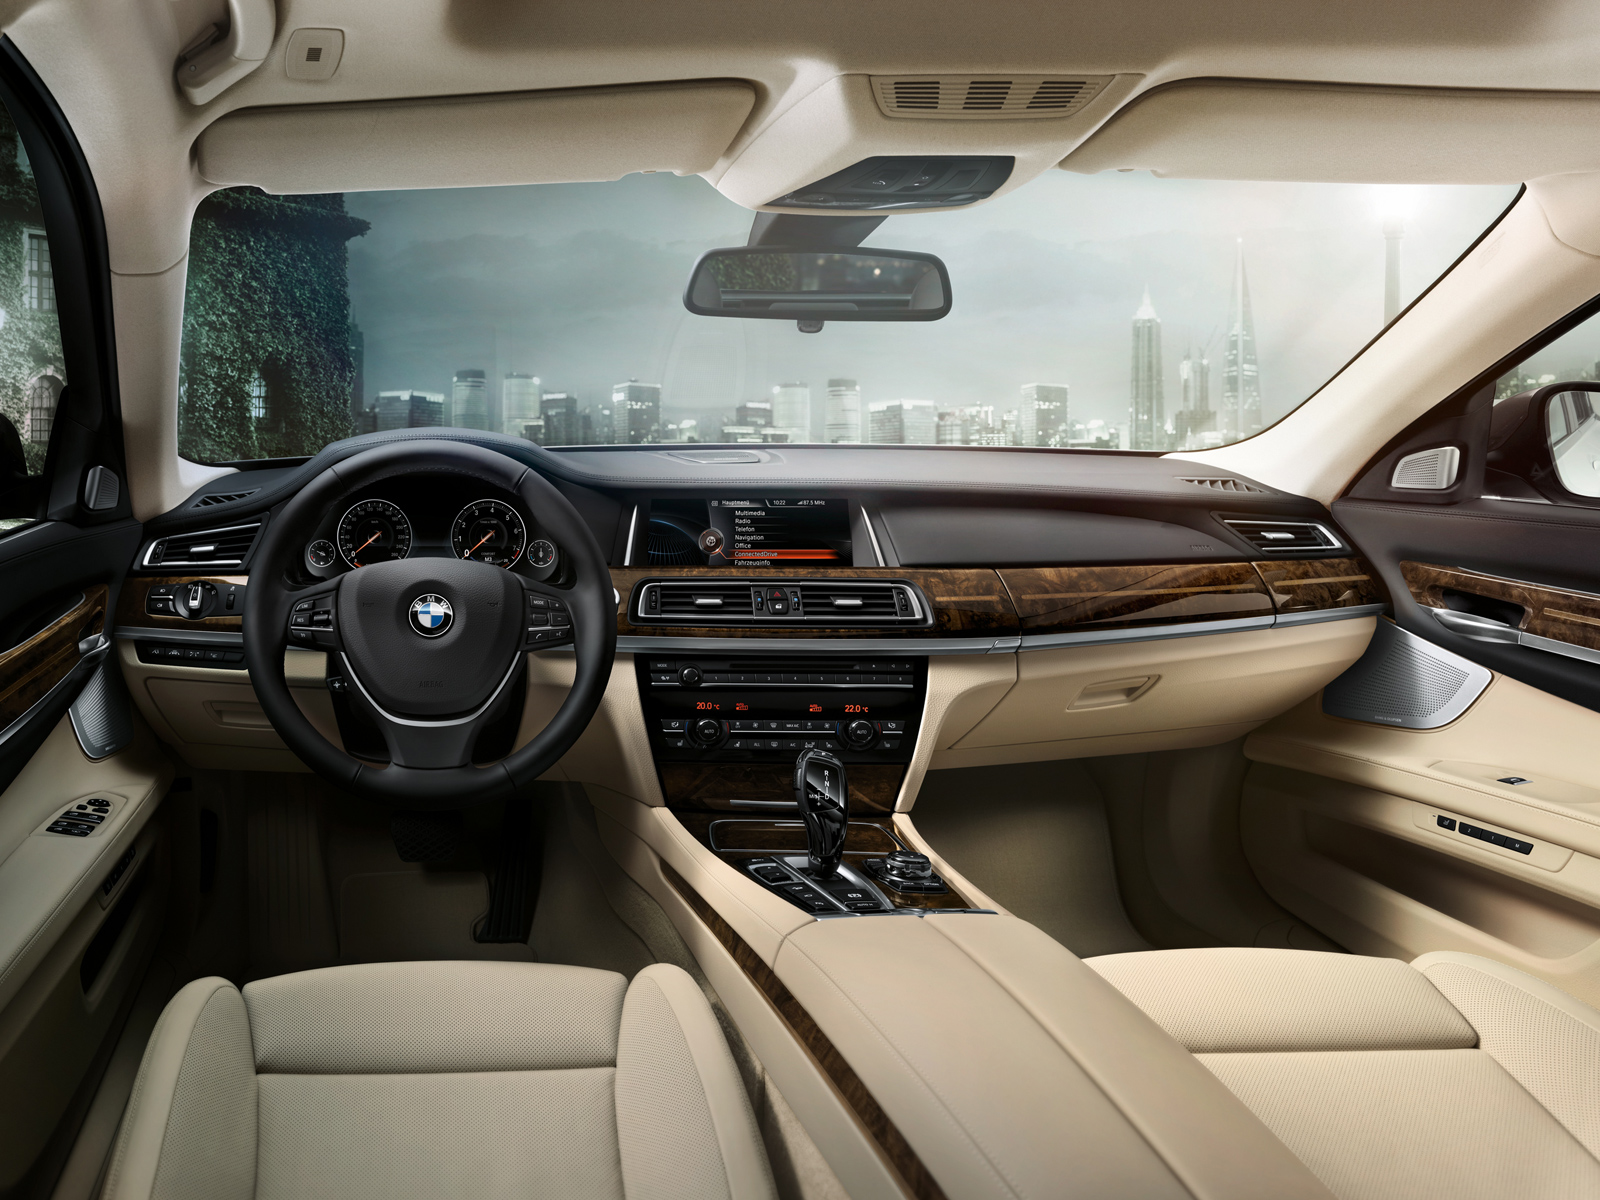 2013 Bmw 7-Series Wallpapers